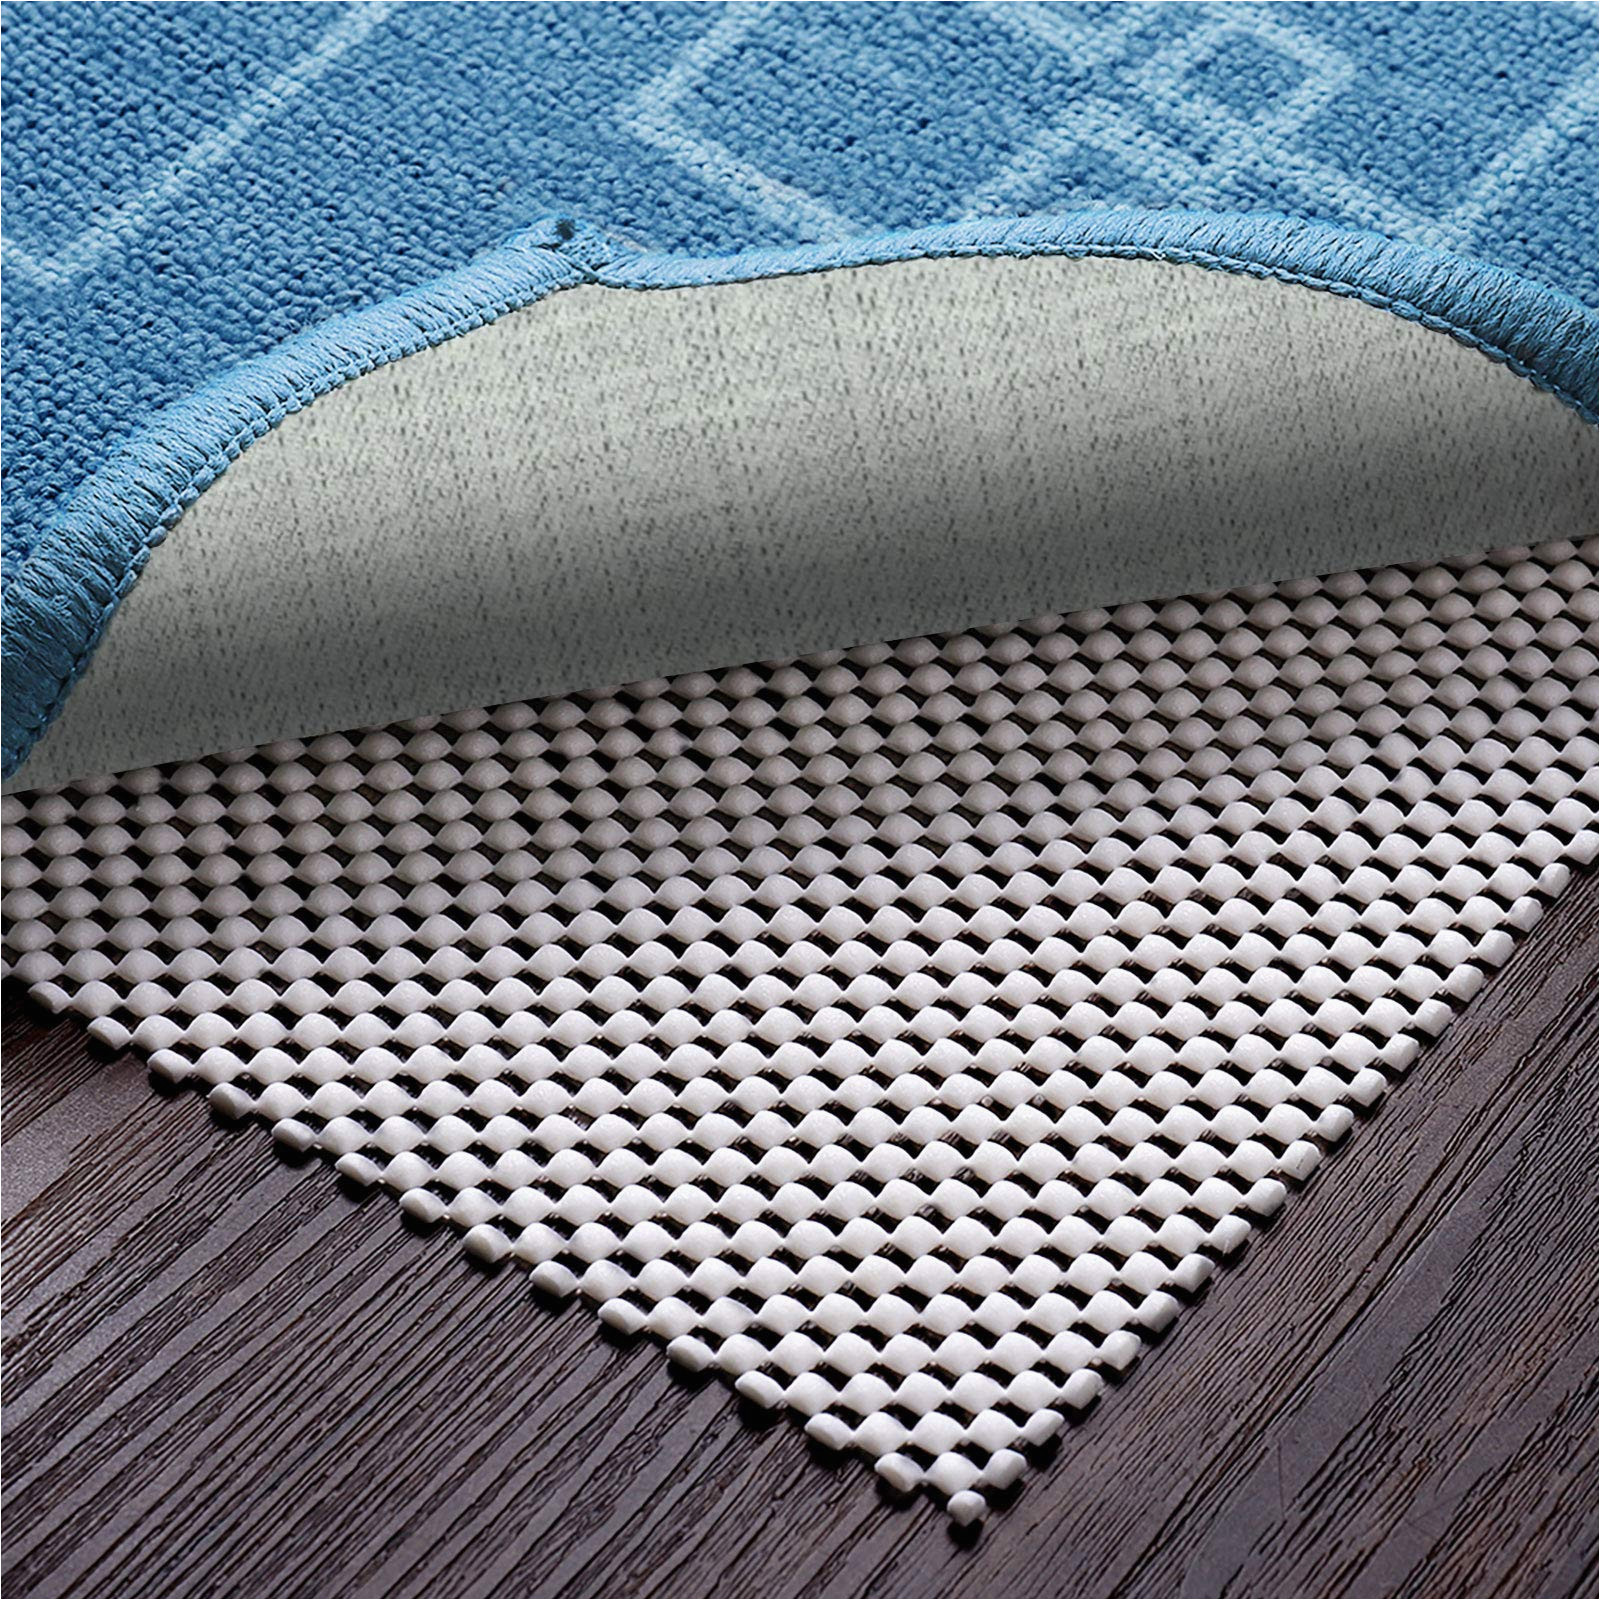 Best Non Slip area Rug Pad Veken 5×7 Rug Pad Gripper Non Slip for Hardwood, Carpet Padding Keep Your Rugs Safe and In Place, Under Rug Anti Skid Mat Liner